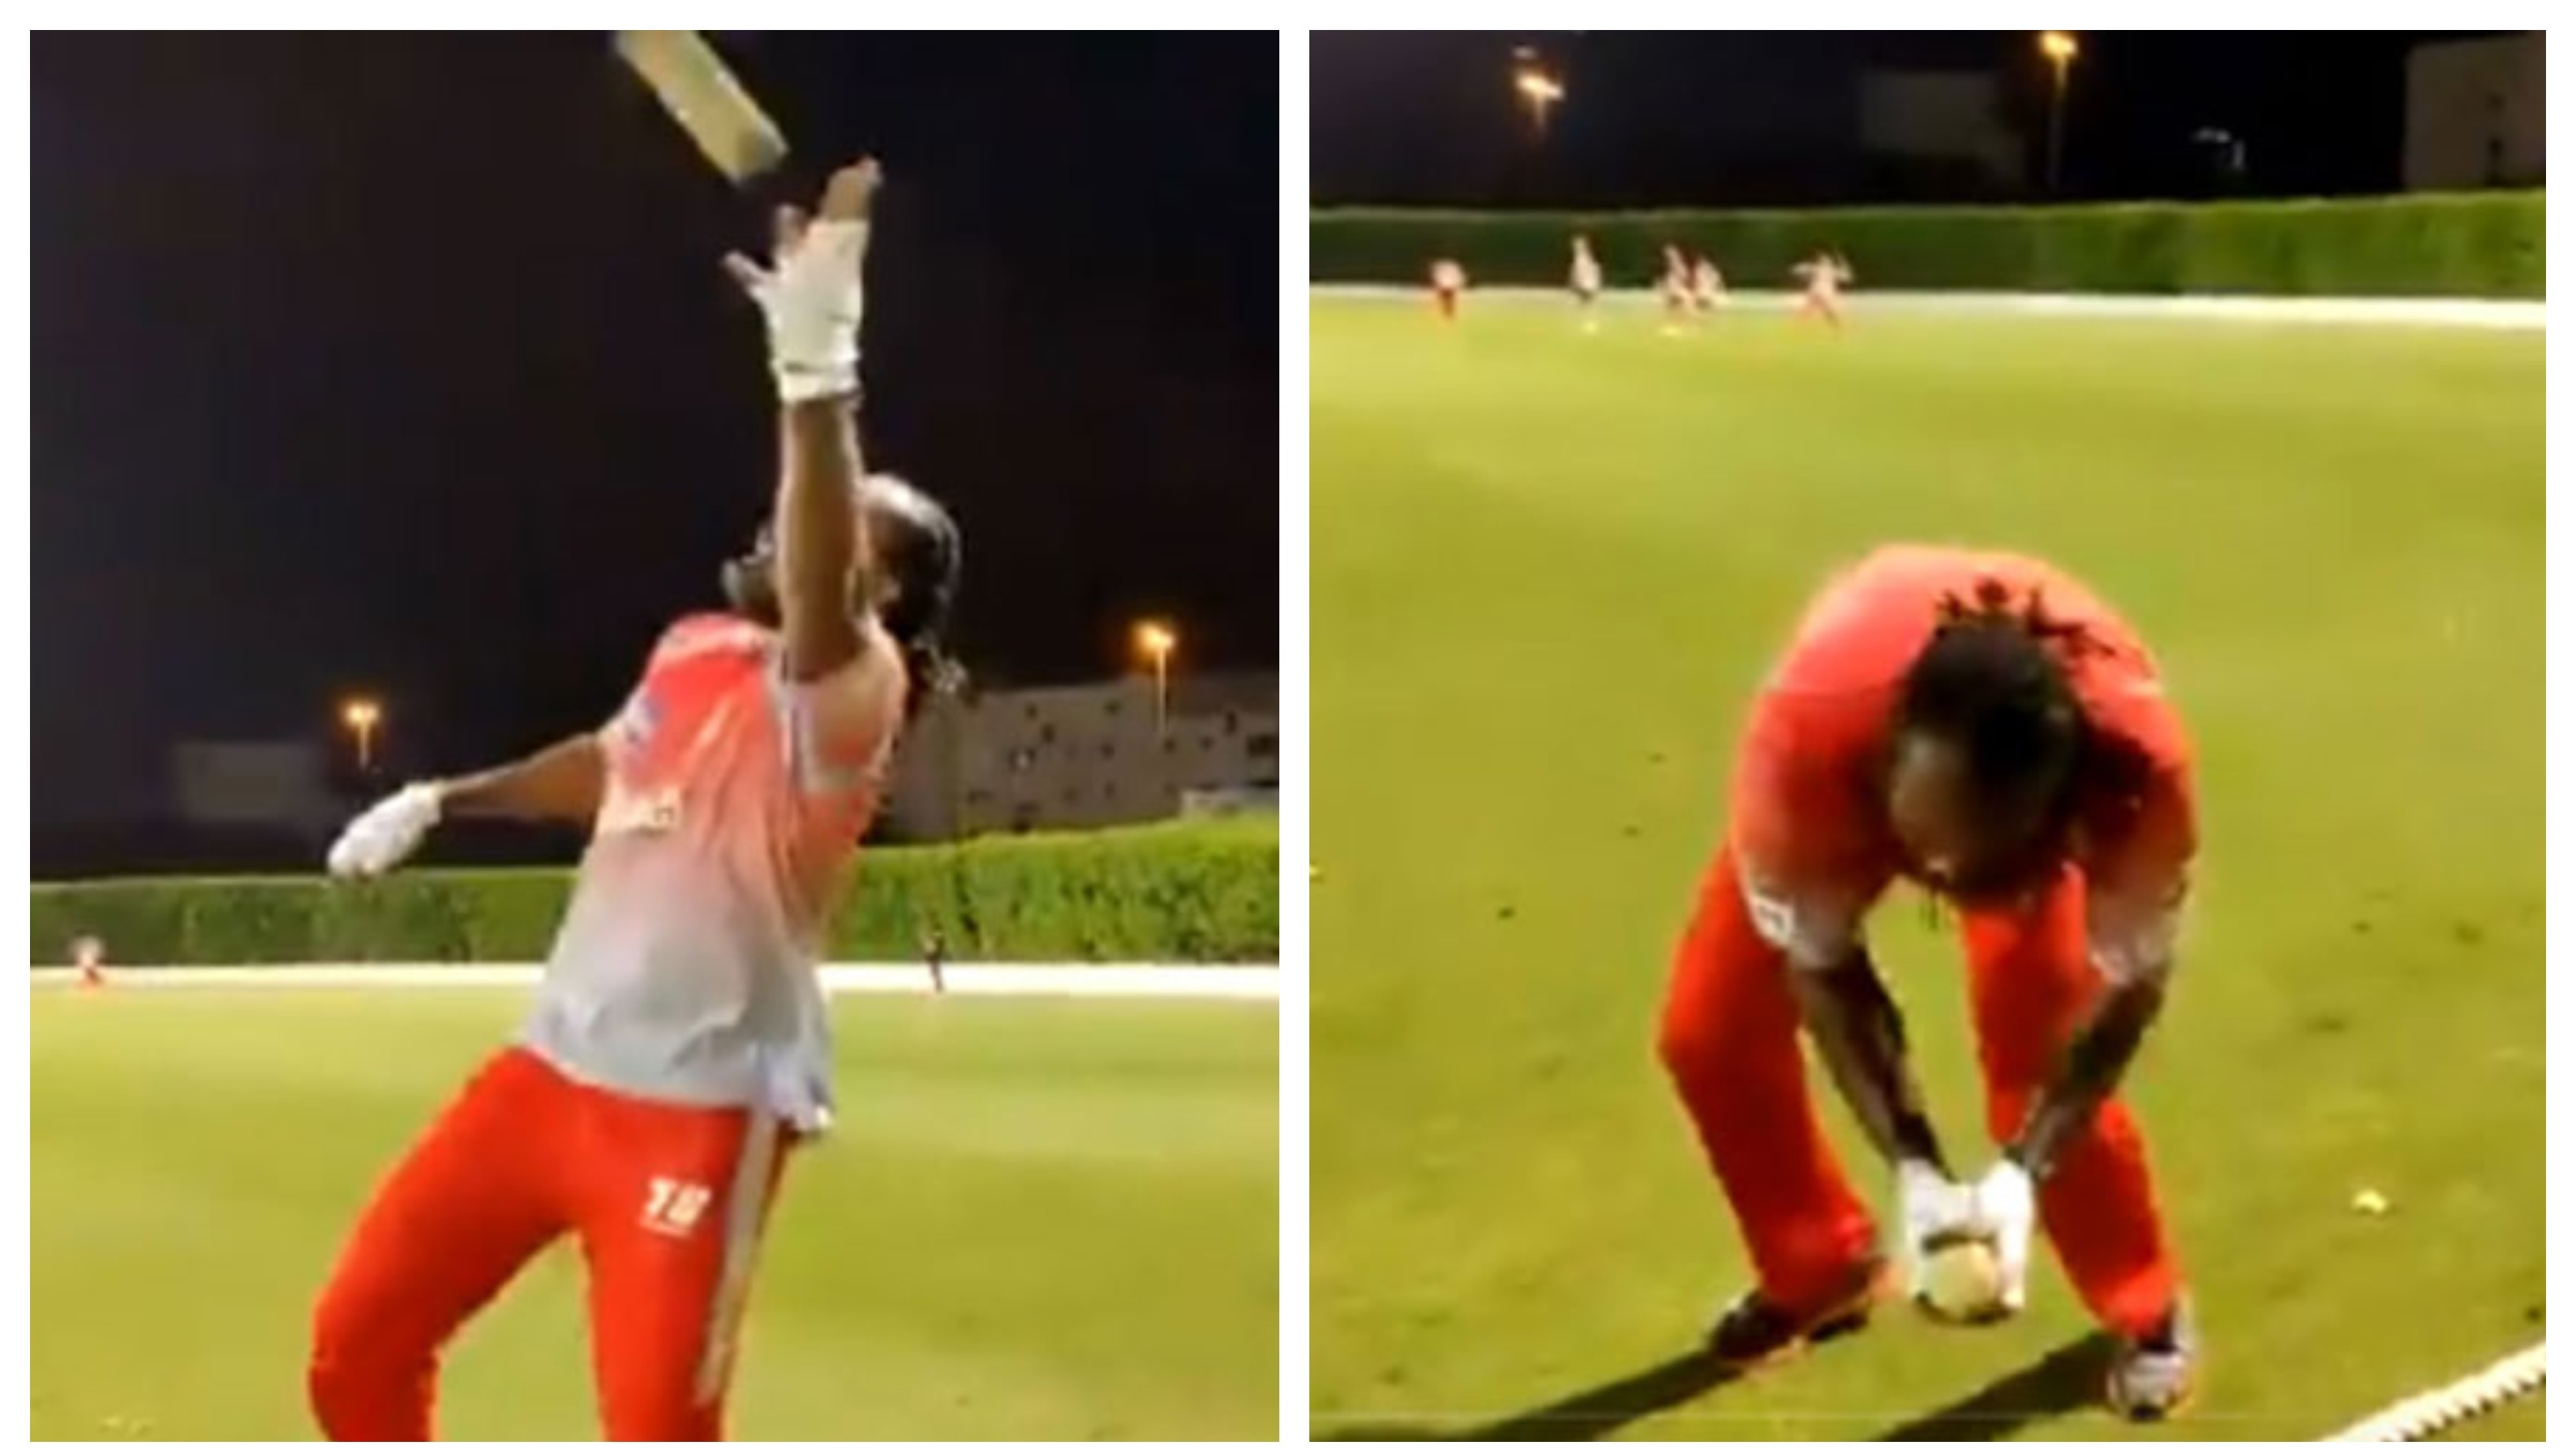 IPL 2020: WATCH – Chris Gayle takes a stunning catch during KXIP’s practice session but with a twist